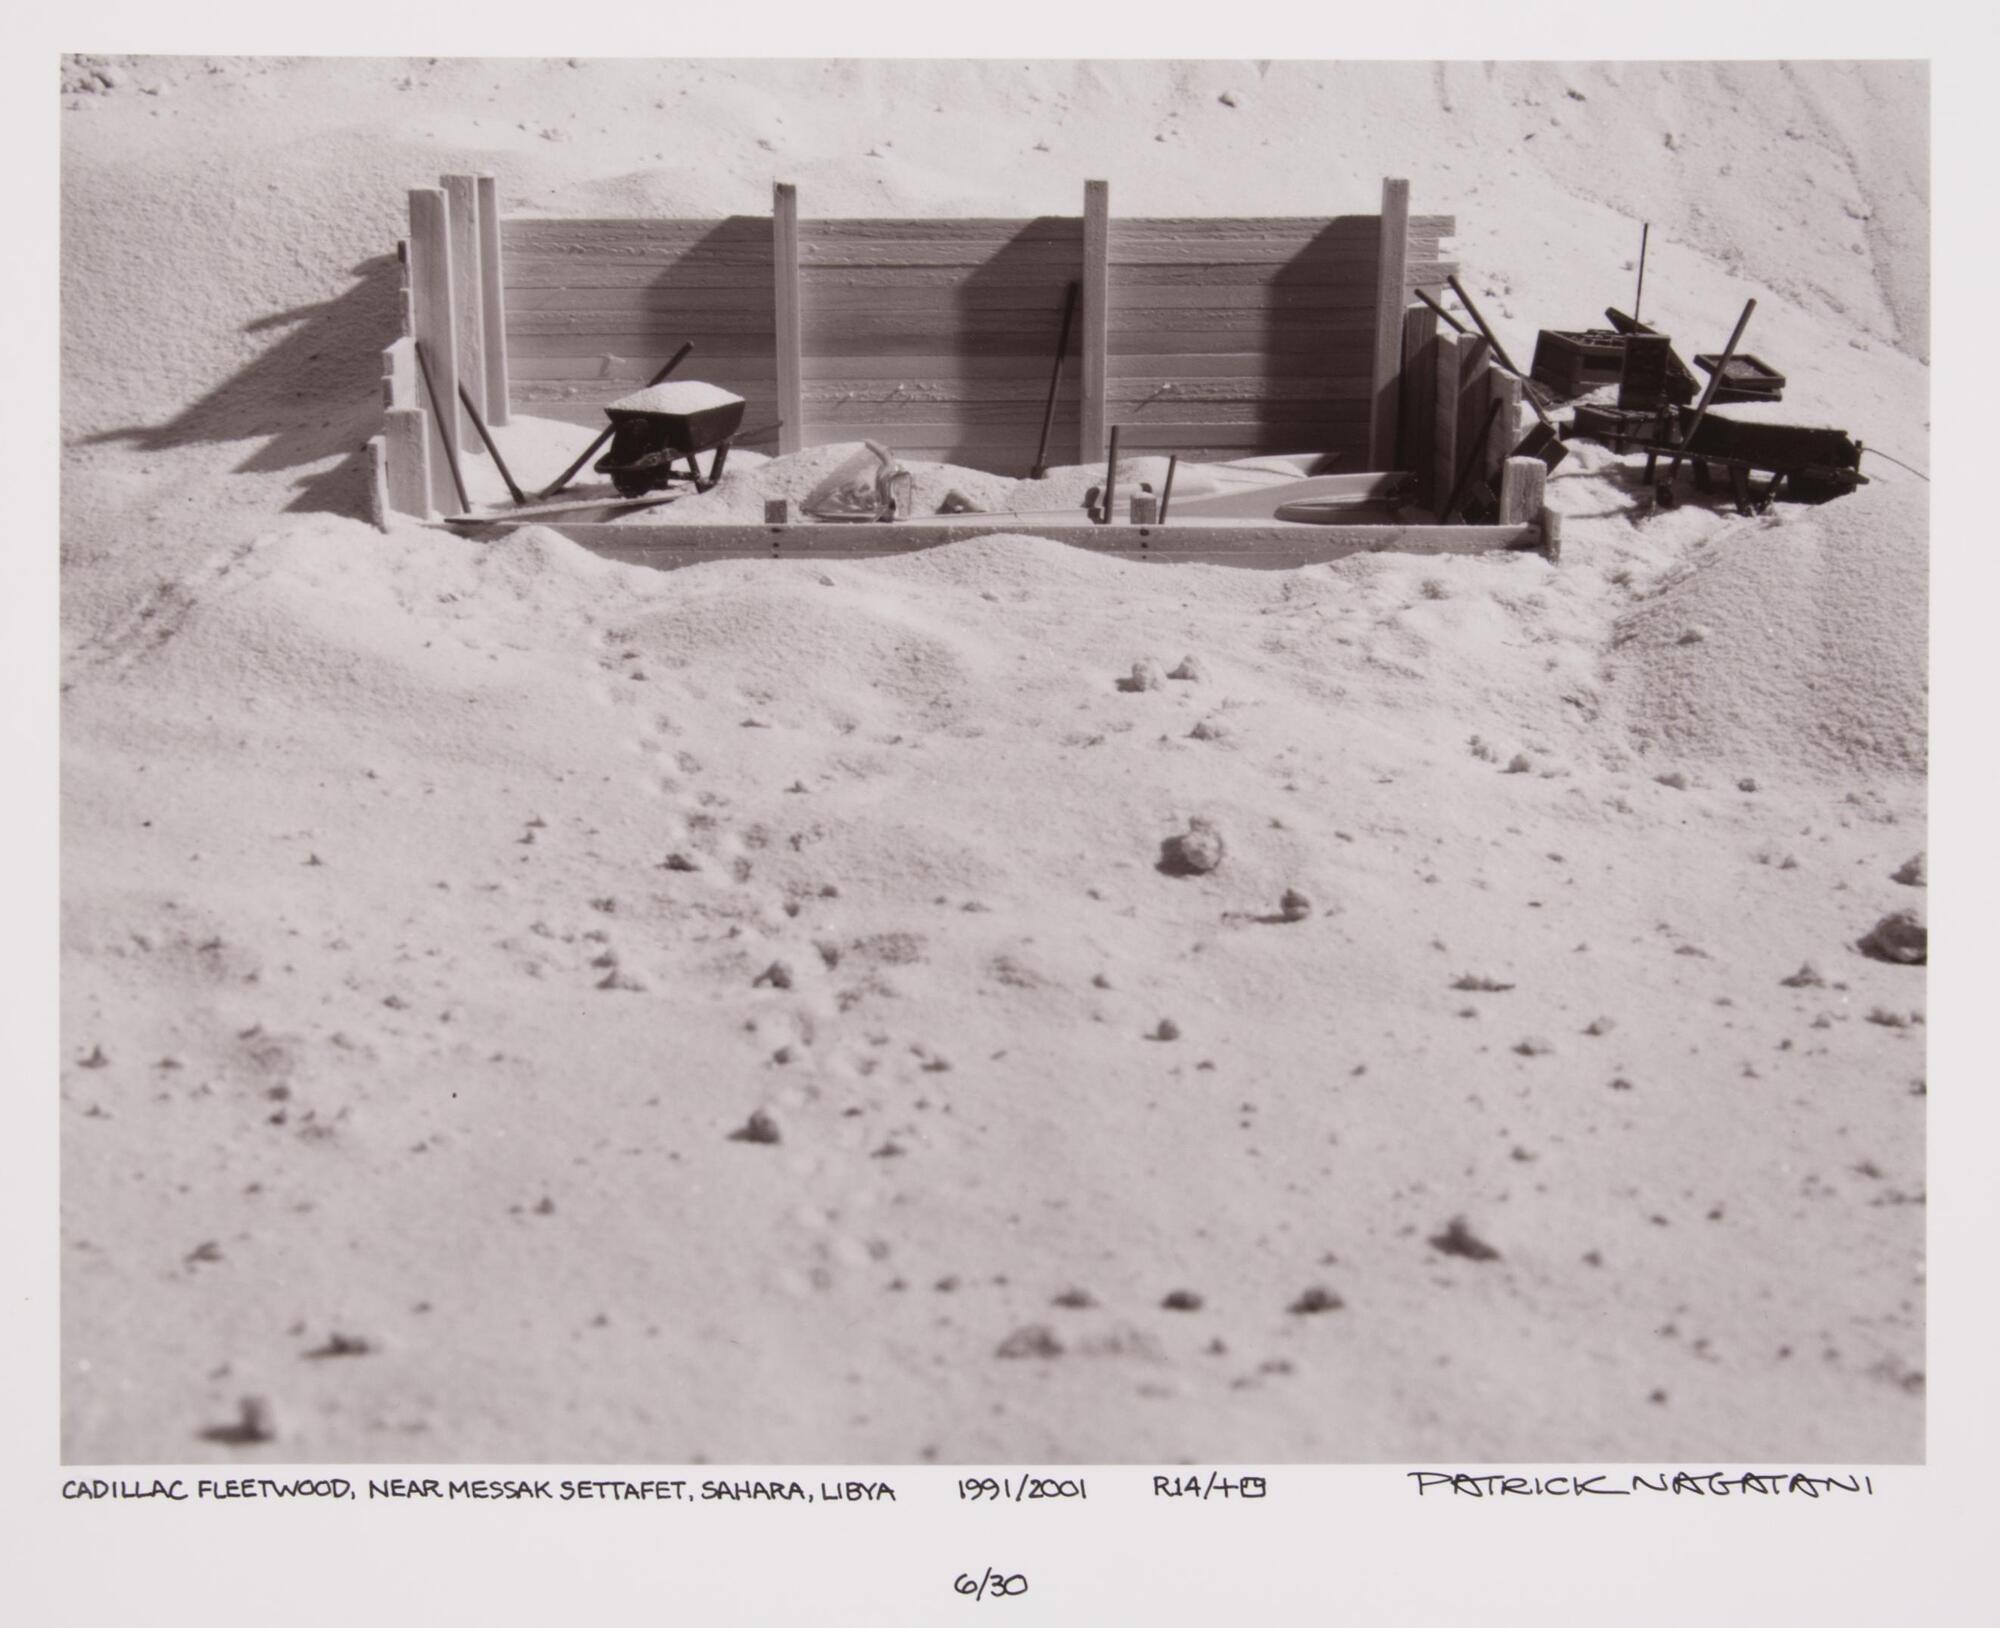 Car under excavation in a desert scene. There is a wooden framework around the car.